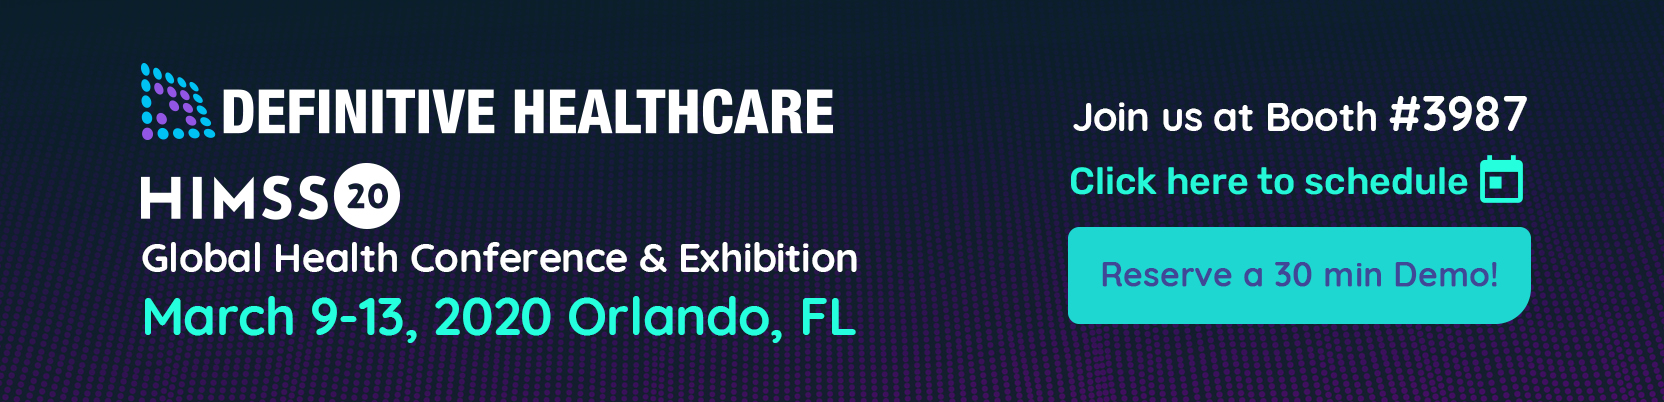 Definitive Healthcare HIMSS Global Health Conference CTA